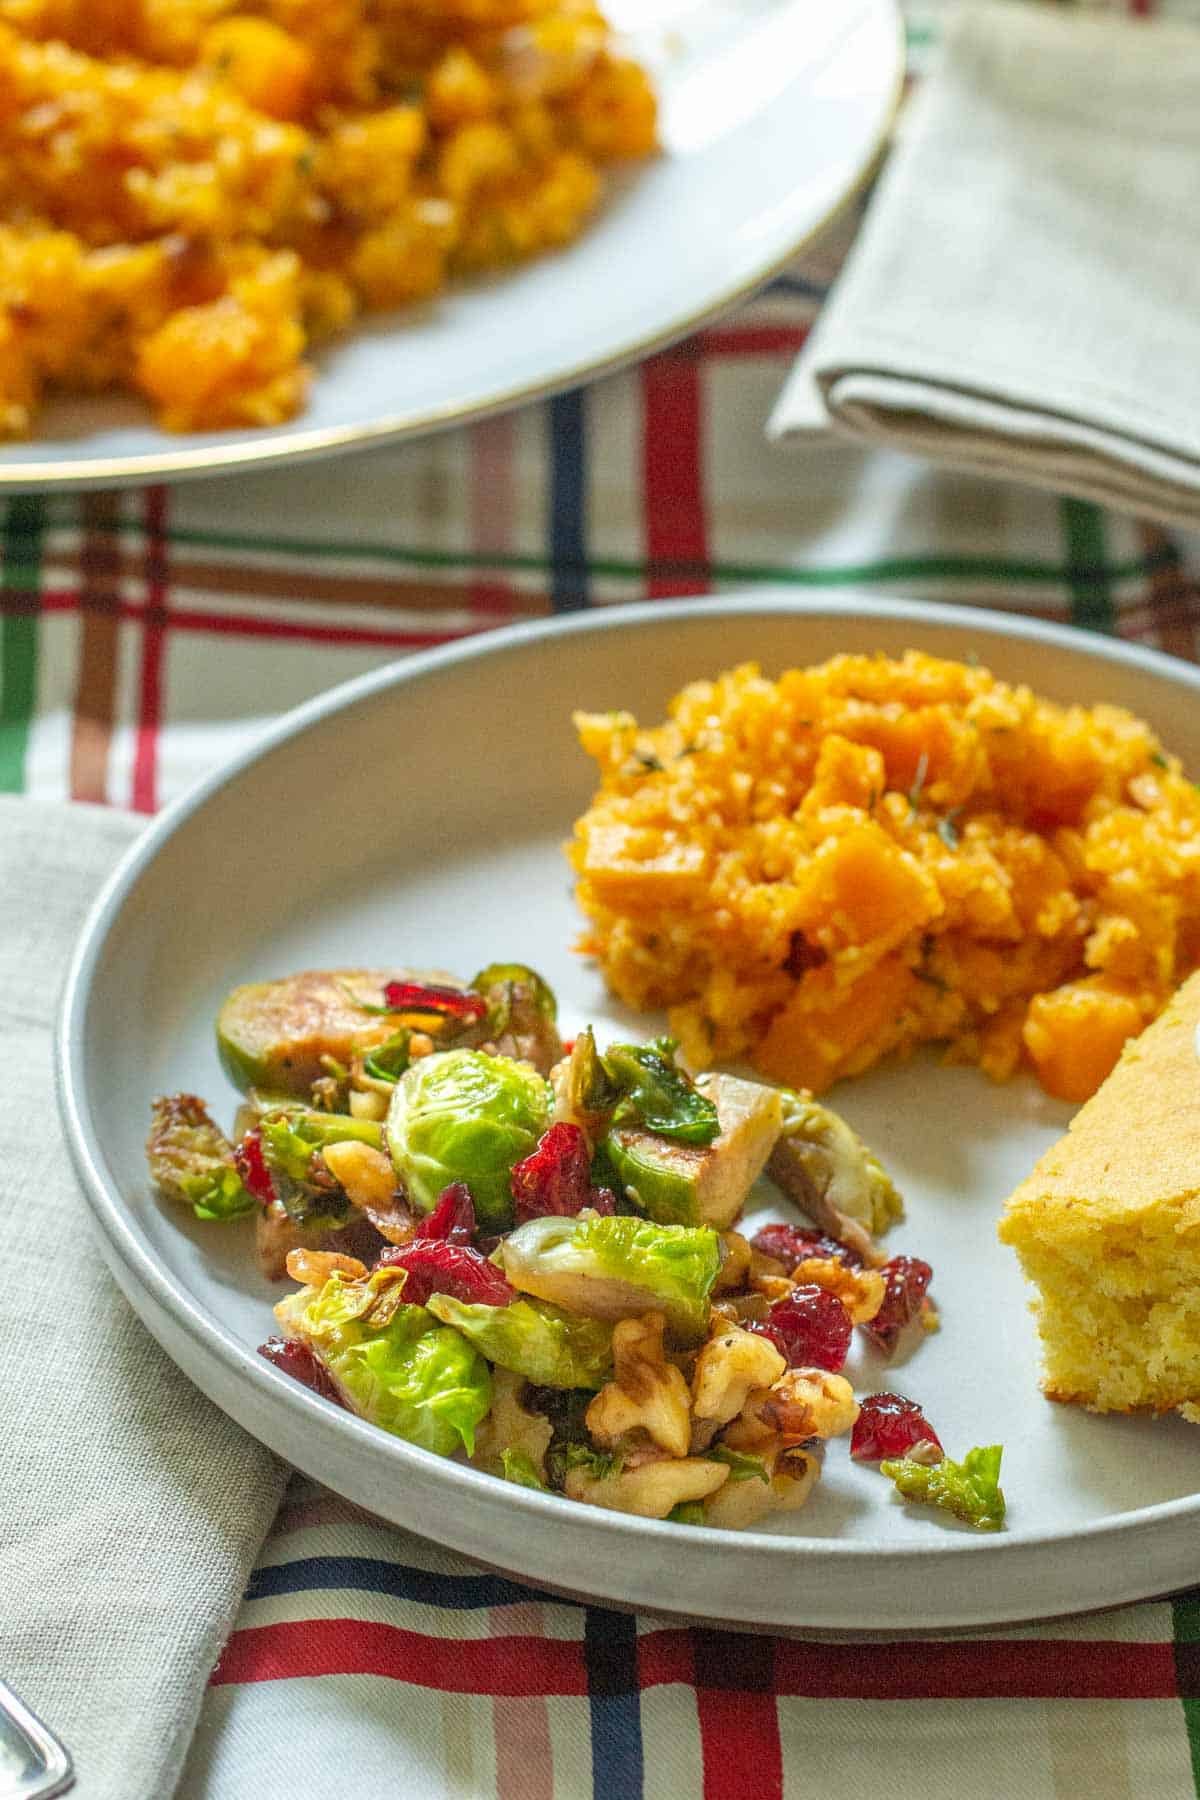 plate with a serving of brussels sprouts with walnuts and cranberries alongside holiday sides